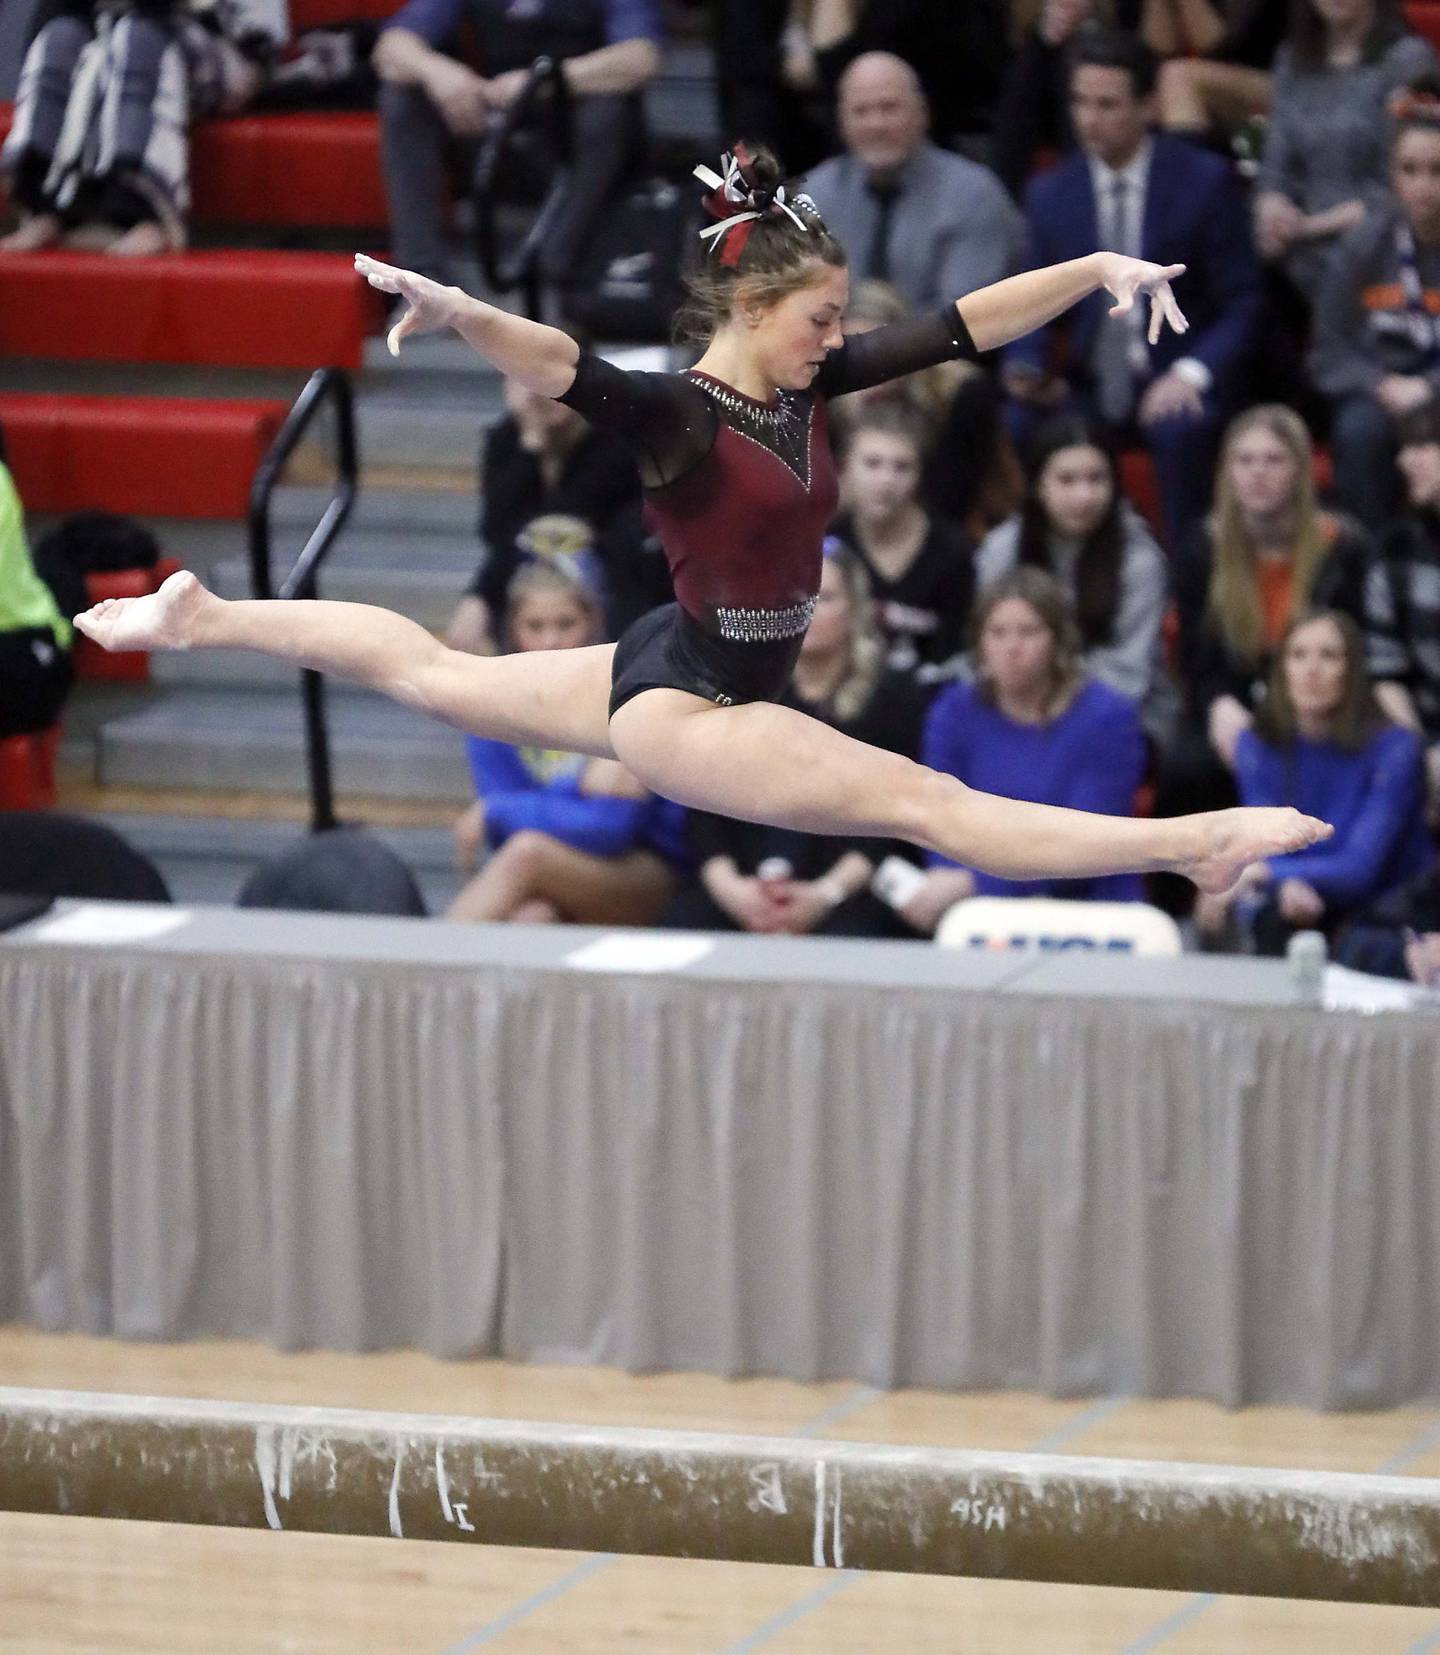 Gabriella Riley of Prairie Ridge competes on the beam during the IHSA Girls Gymnastics state finals Saturday February 18, 2023 in Palatine.